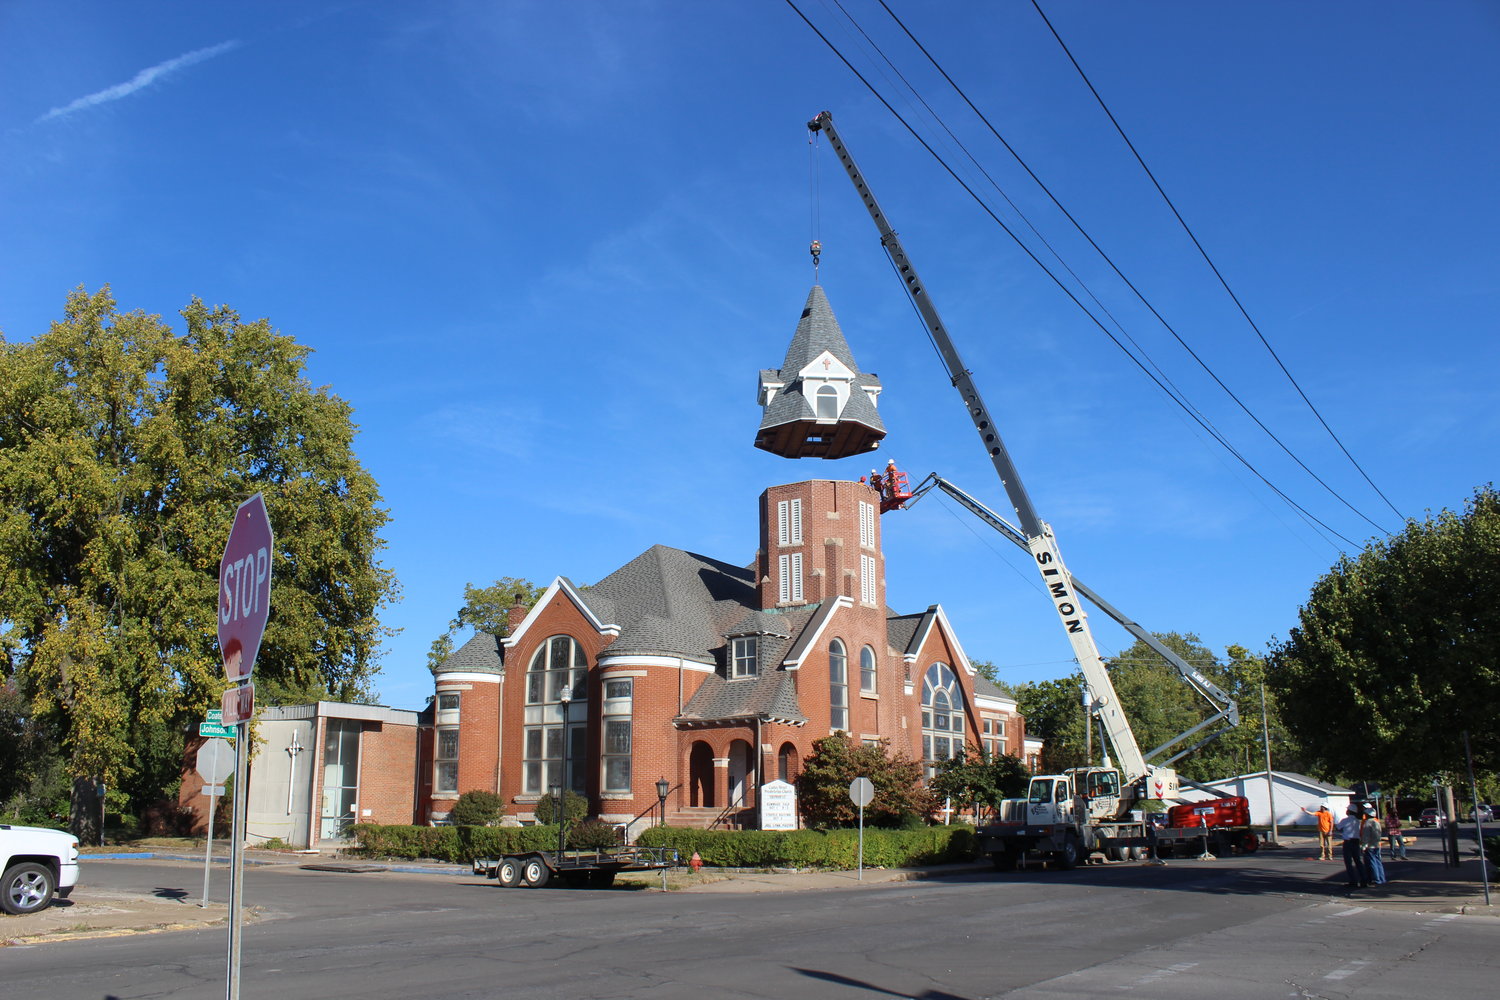 The steeple is lowered onto the bell tower at Coates Street Presbyterian Church. The new steeple replaces one destroyed by a lightning strike in 2019.